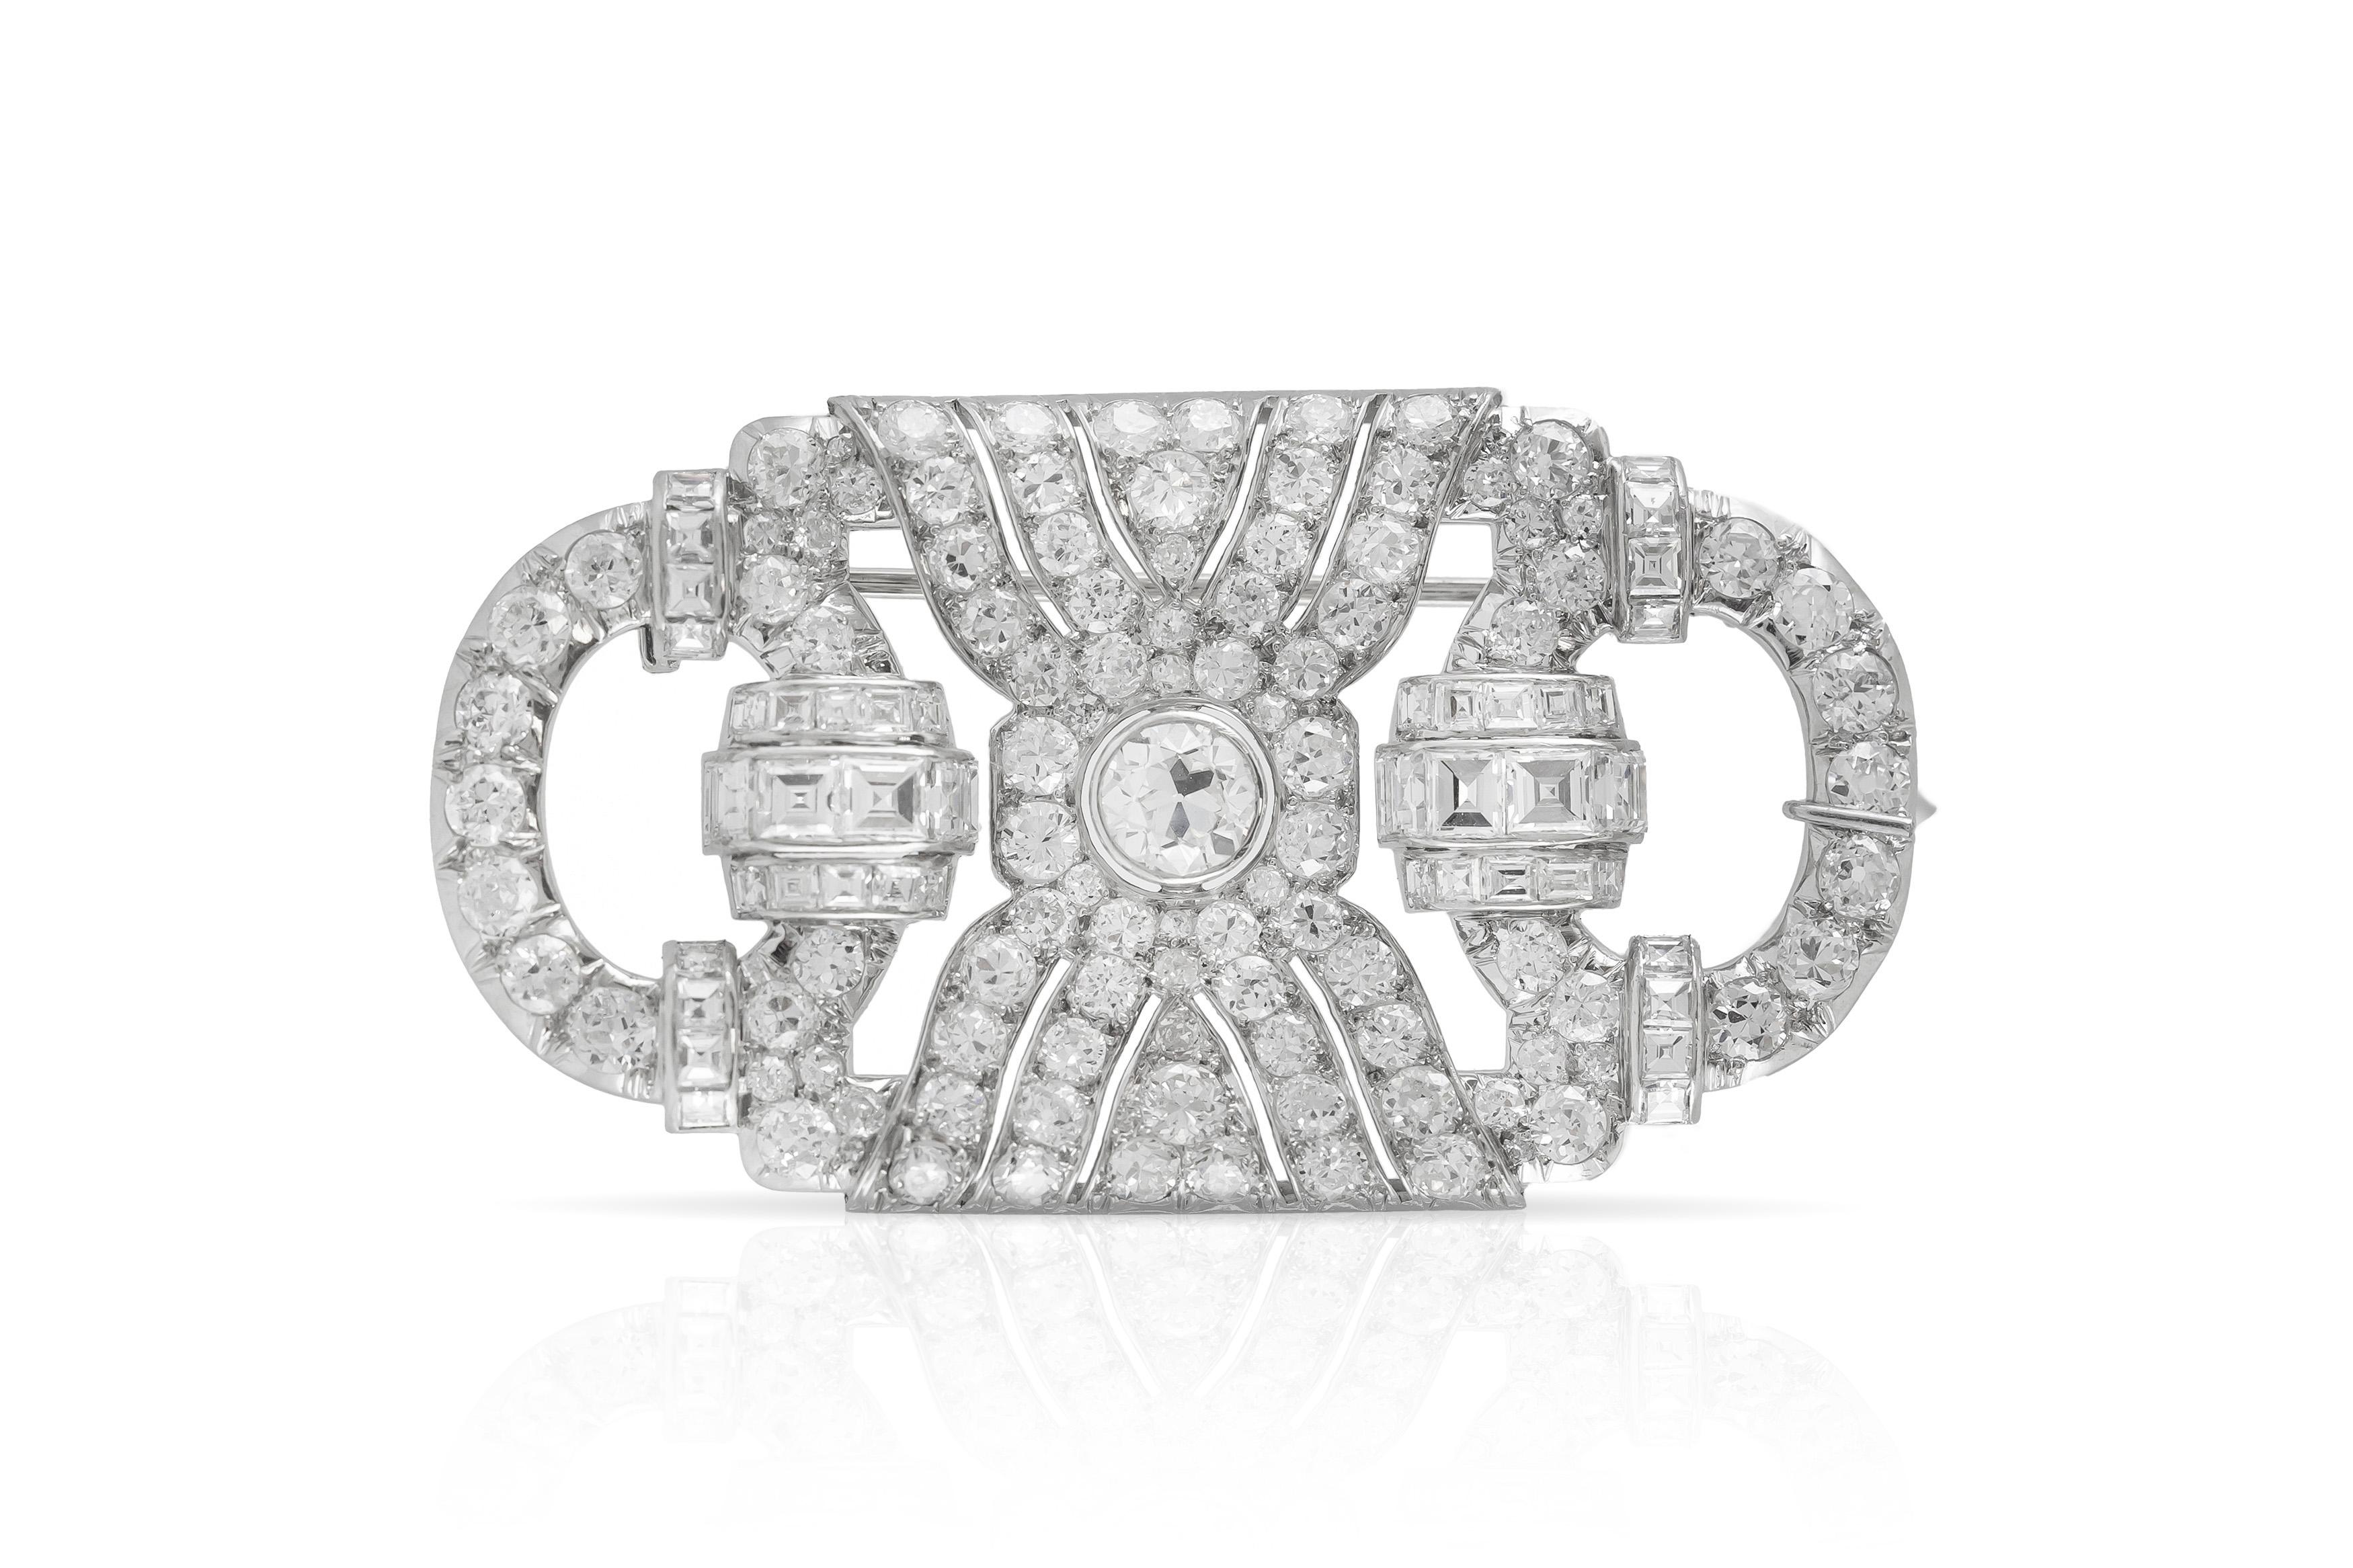 The brooch is finely crafted in platinum with diamonds weighing approximately total of 1.20, 2.00, 3.60 and 8.00 carat.
